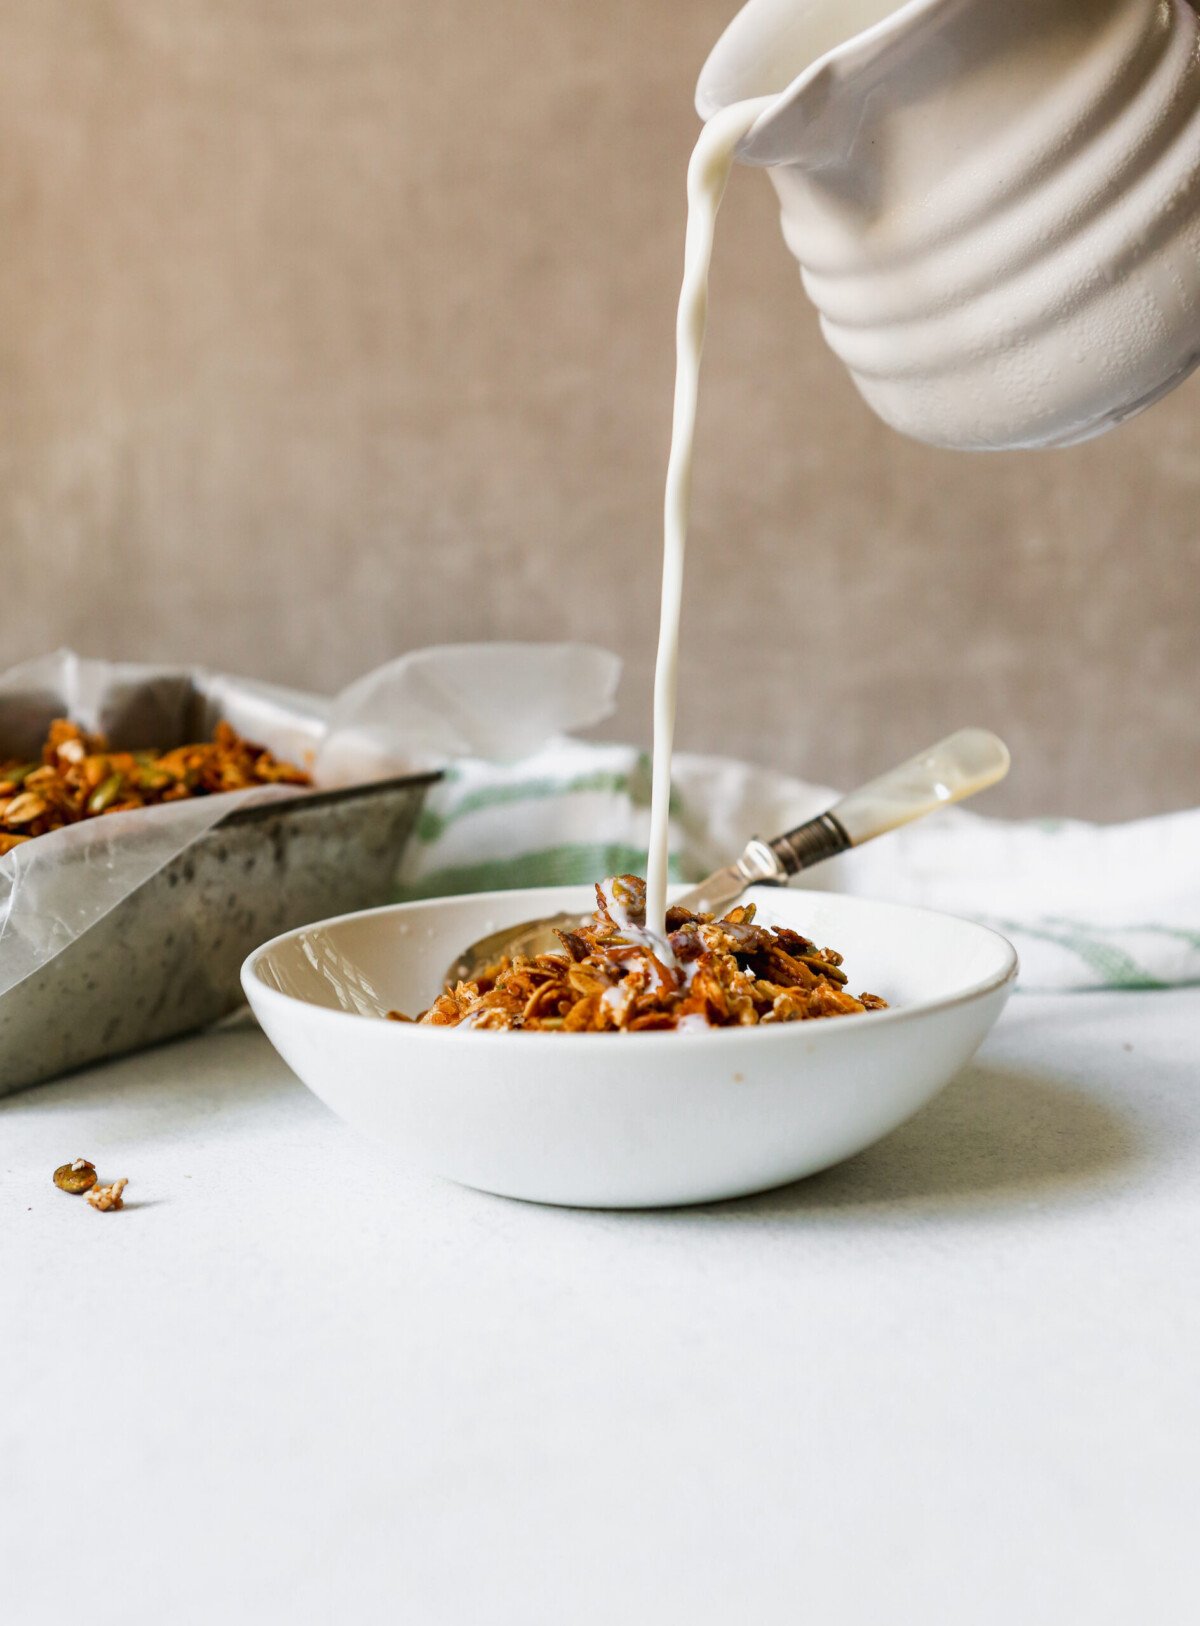 Homemade granola in a white bowl with milk pouring into bowl.